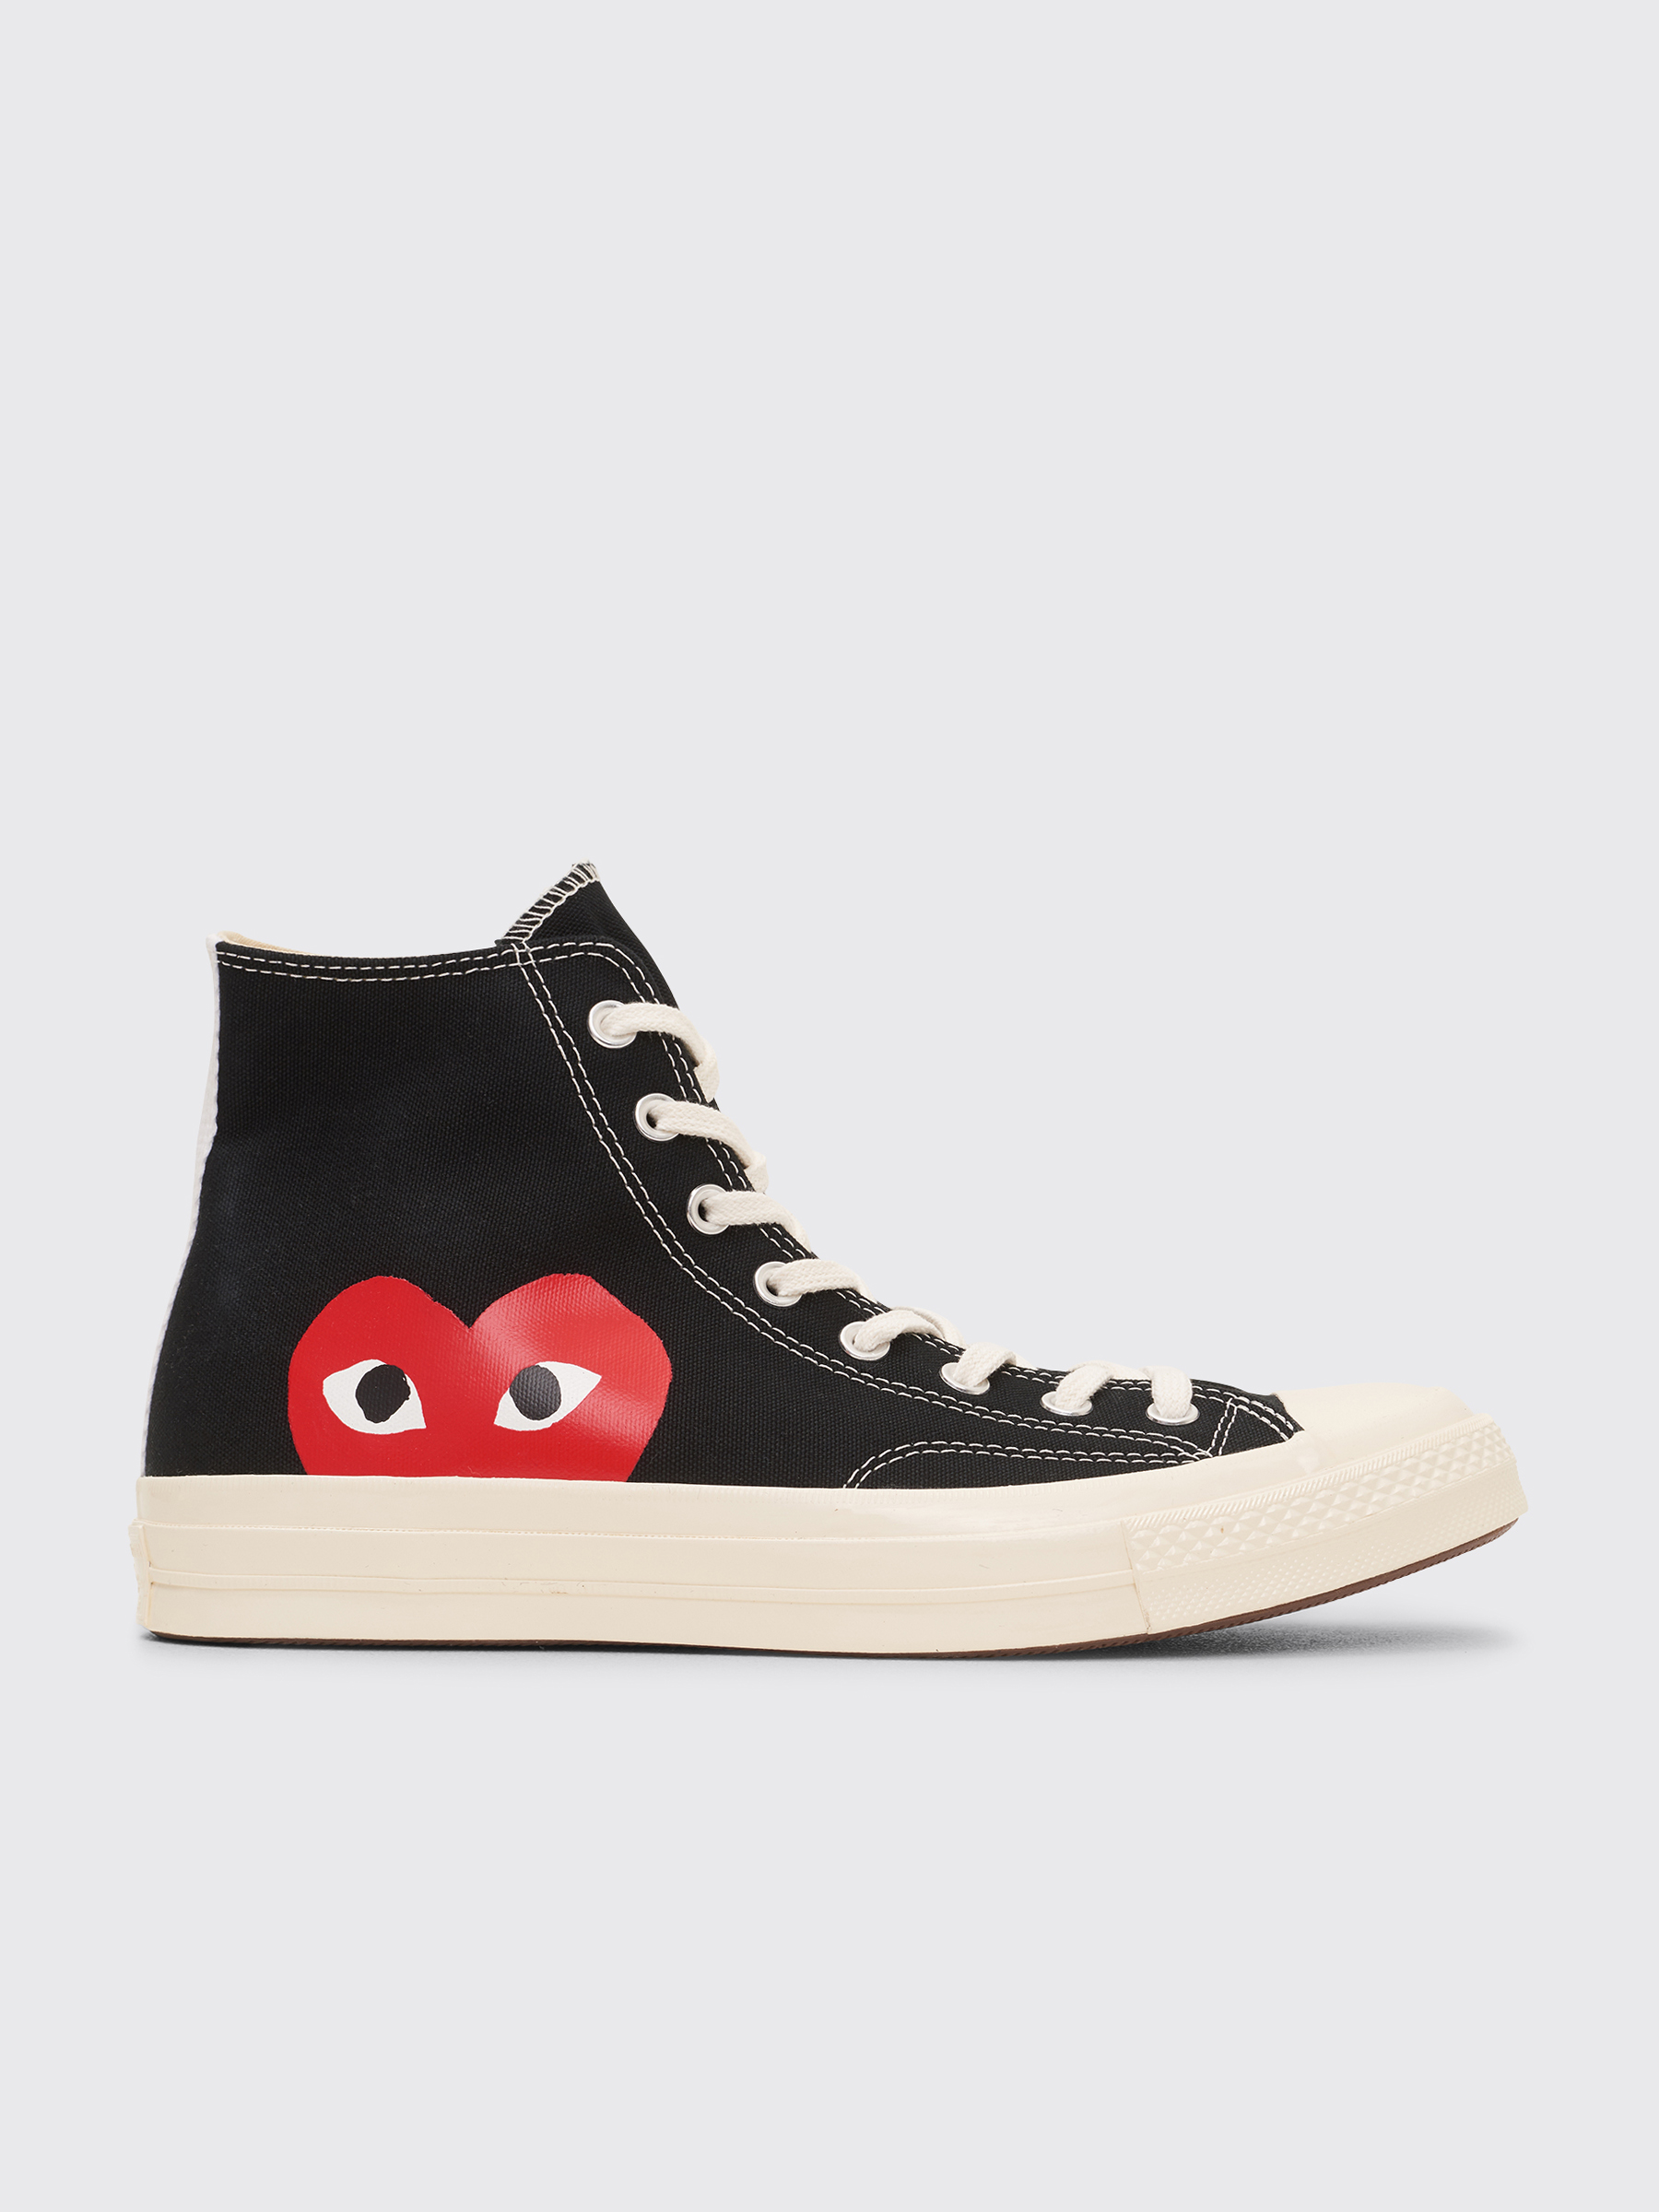 converse chuck taylor with heart